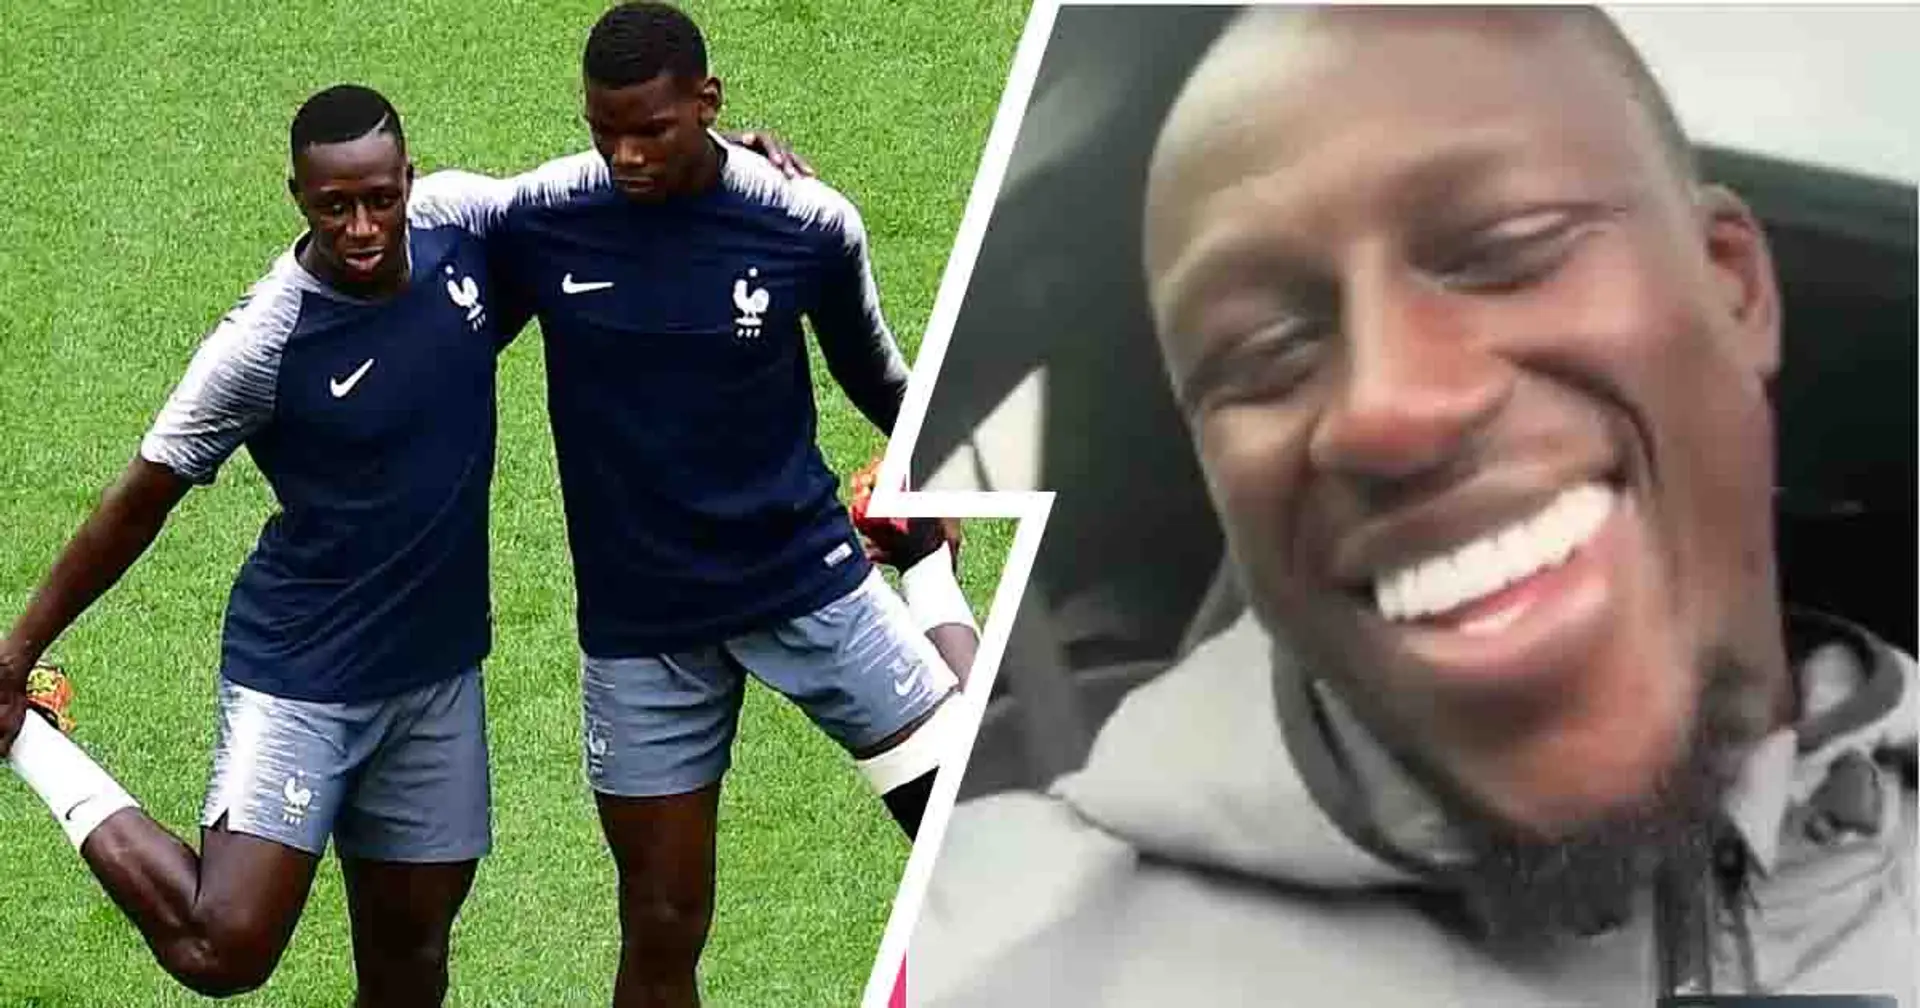 Rio, Depay & Pogba support Benjamin Mendy as ex-Man City player found not guilty of rape